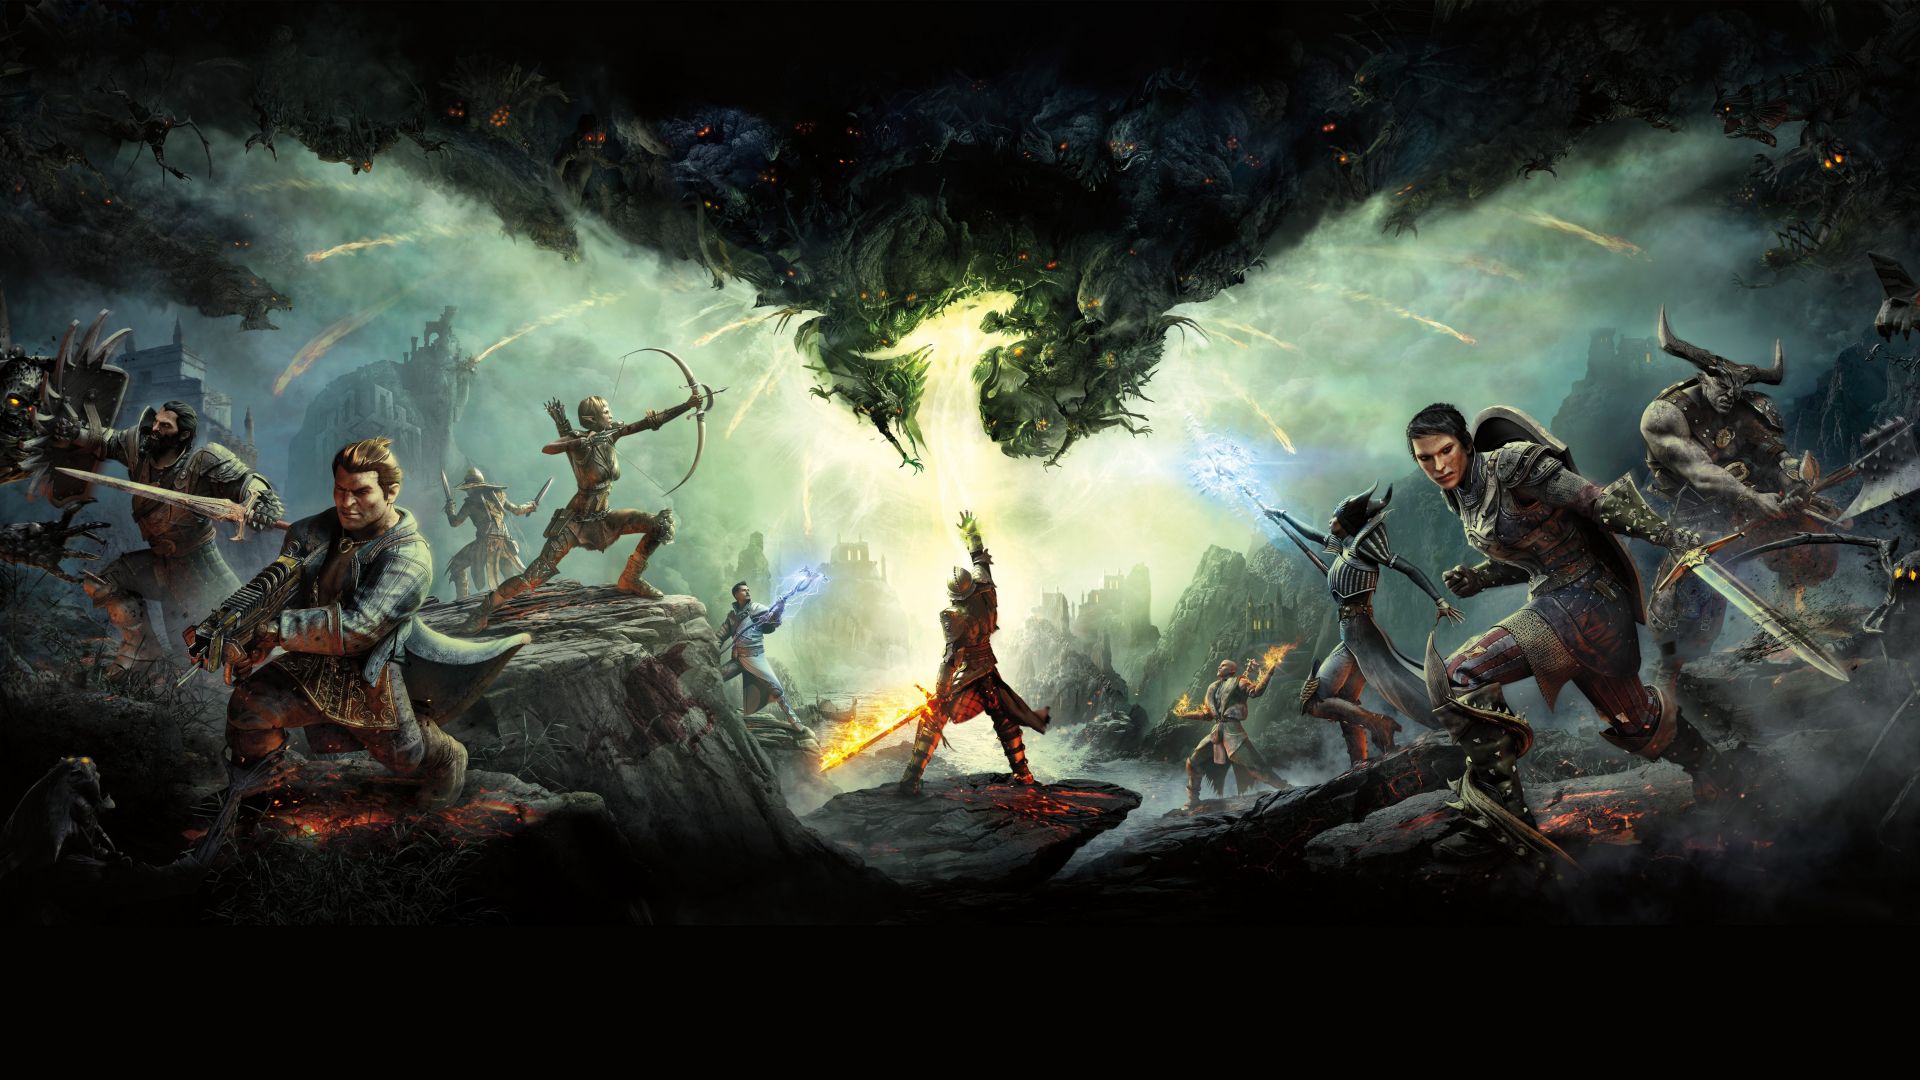 Wallpaper Dragon Age: Inquisition, video game, warriors, 5k